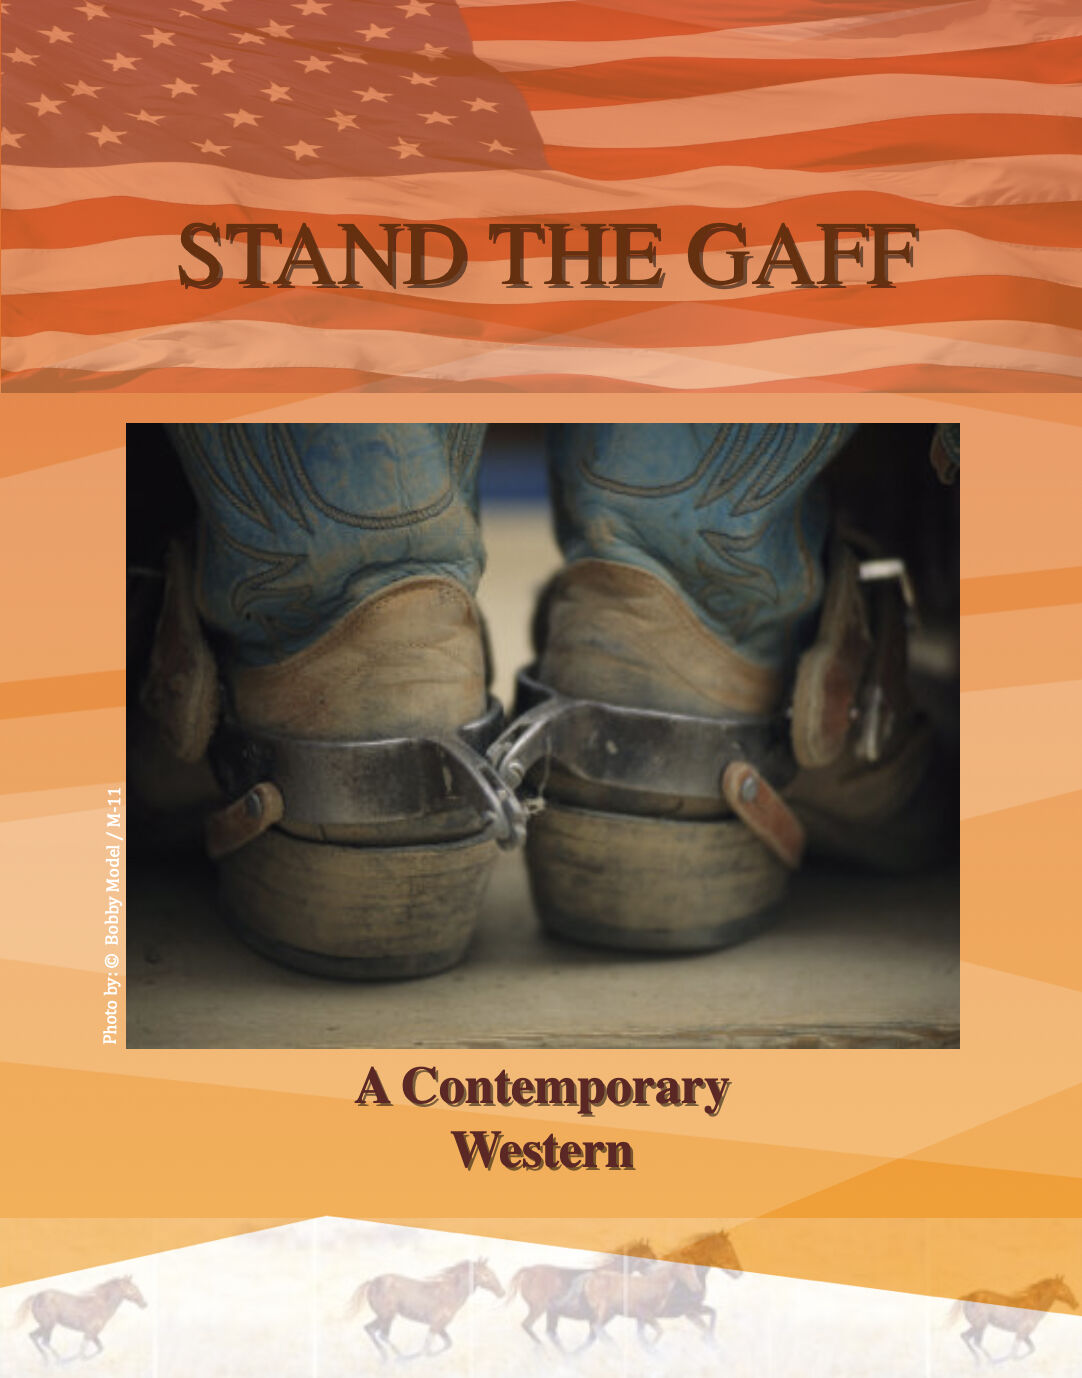 STAND THE GAFF - A CONTEMPORARY WESTERN